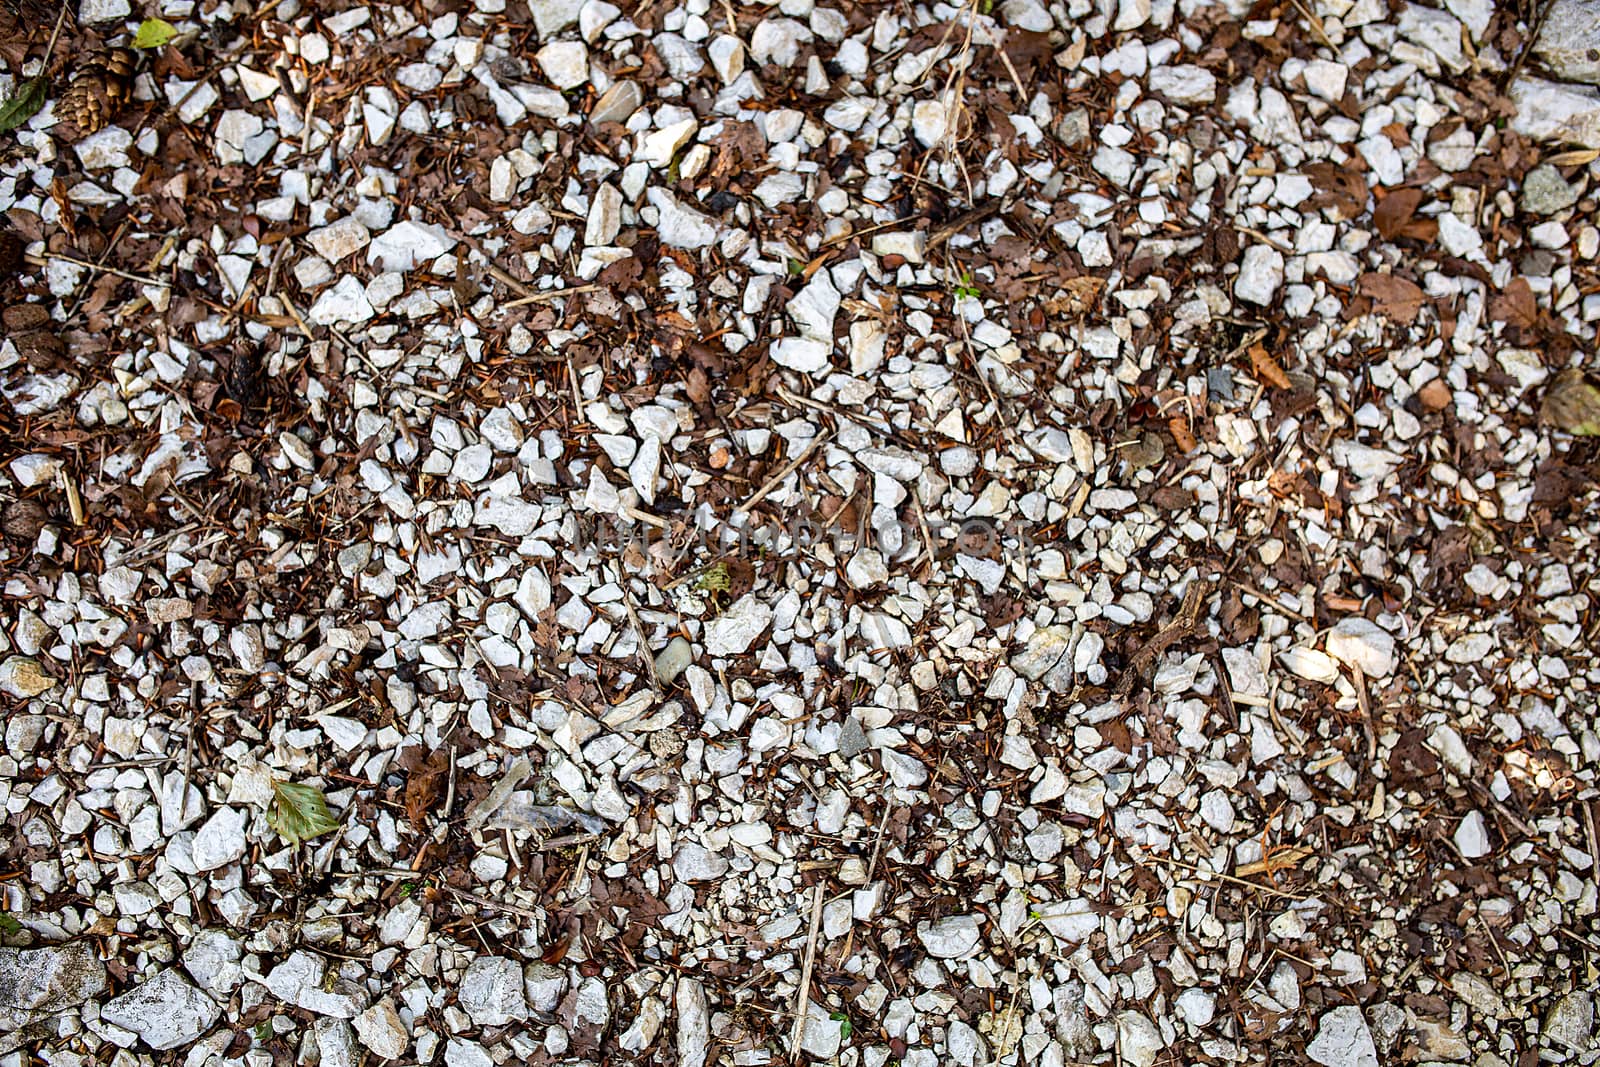 The texture of stone soil. Background image of a stone crumb with small and large white stones interspersed with leaves.